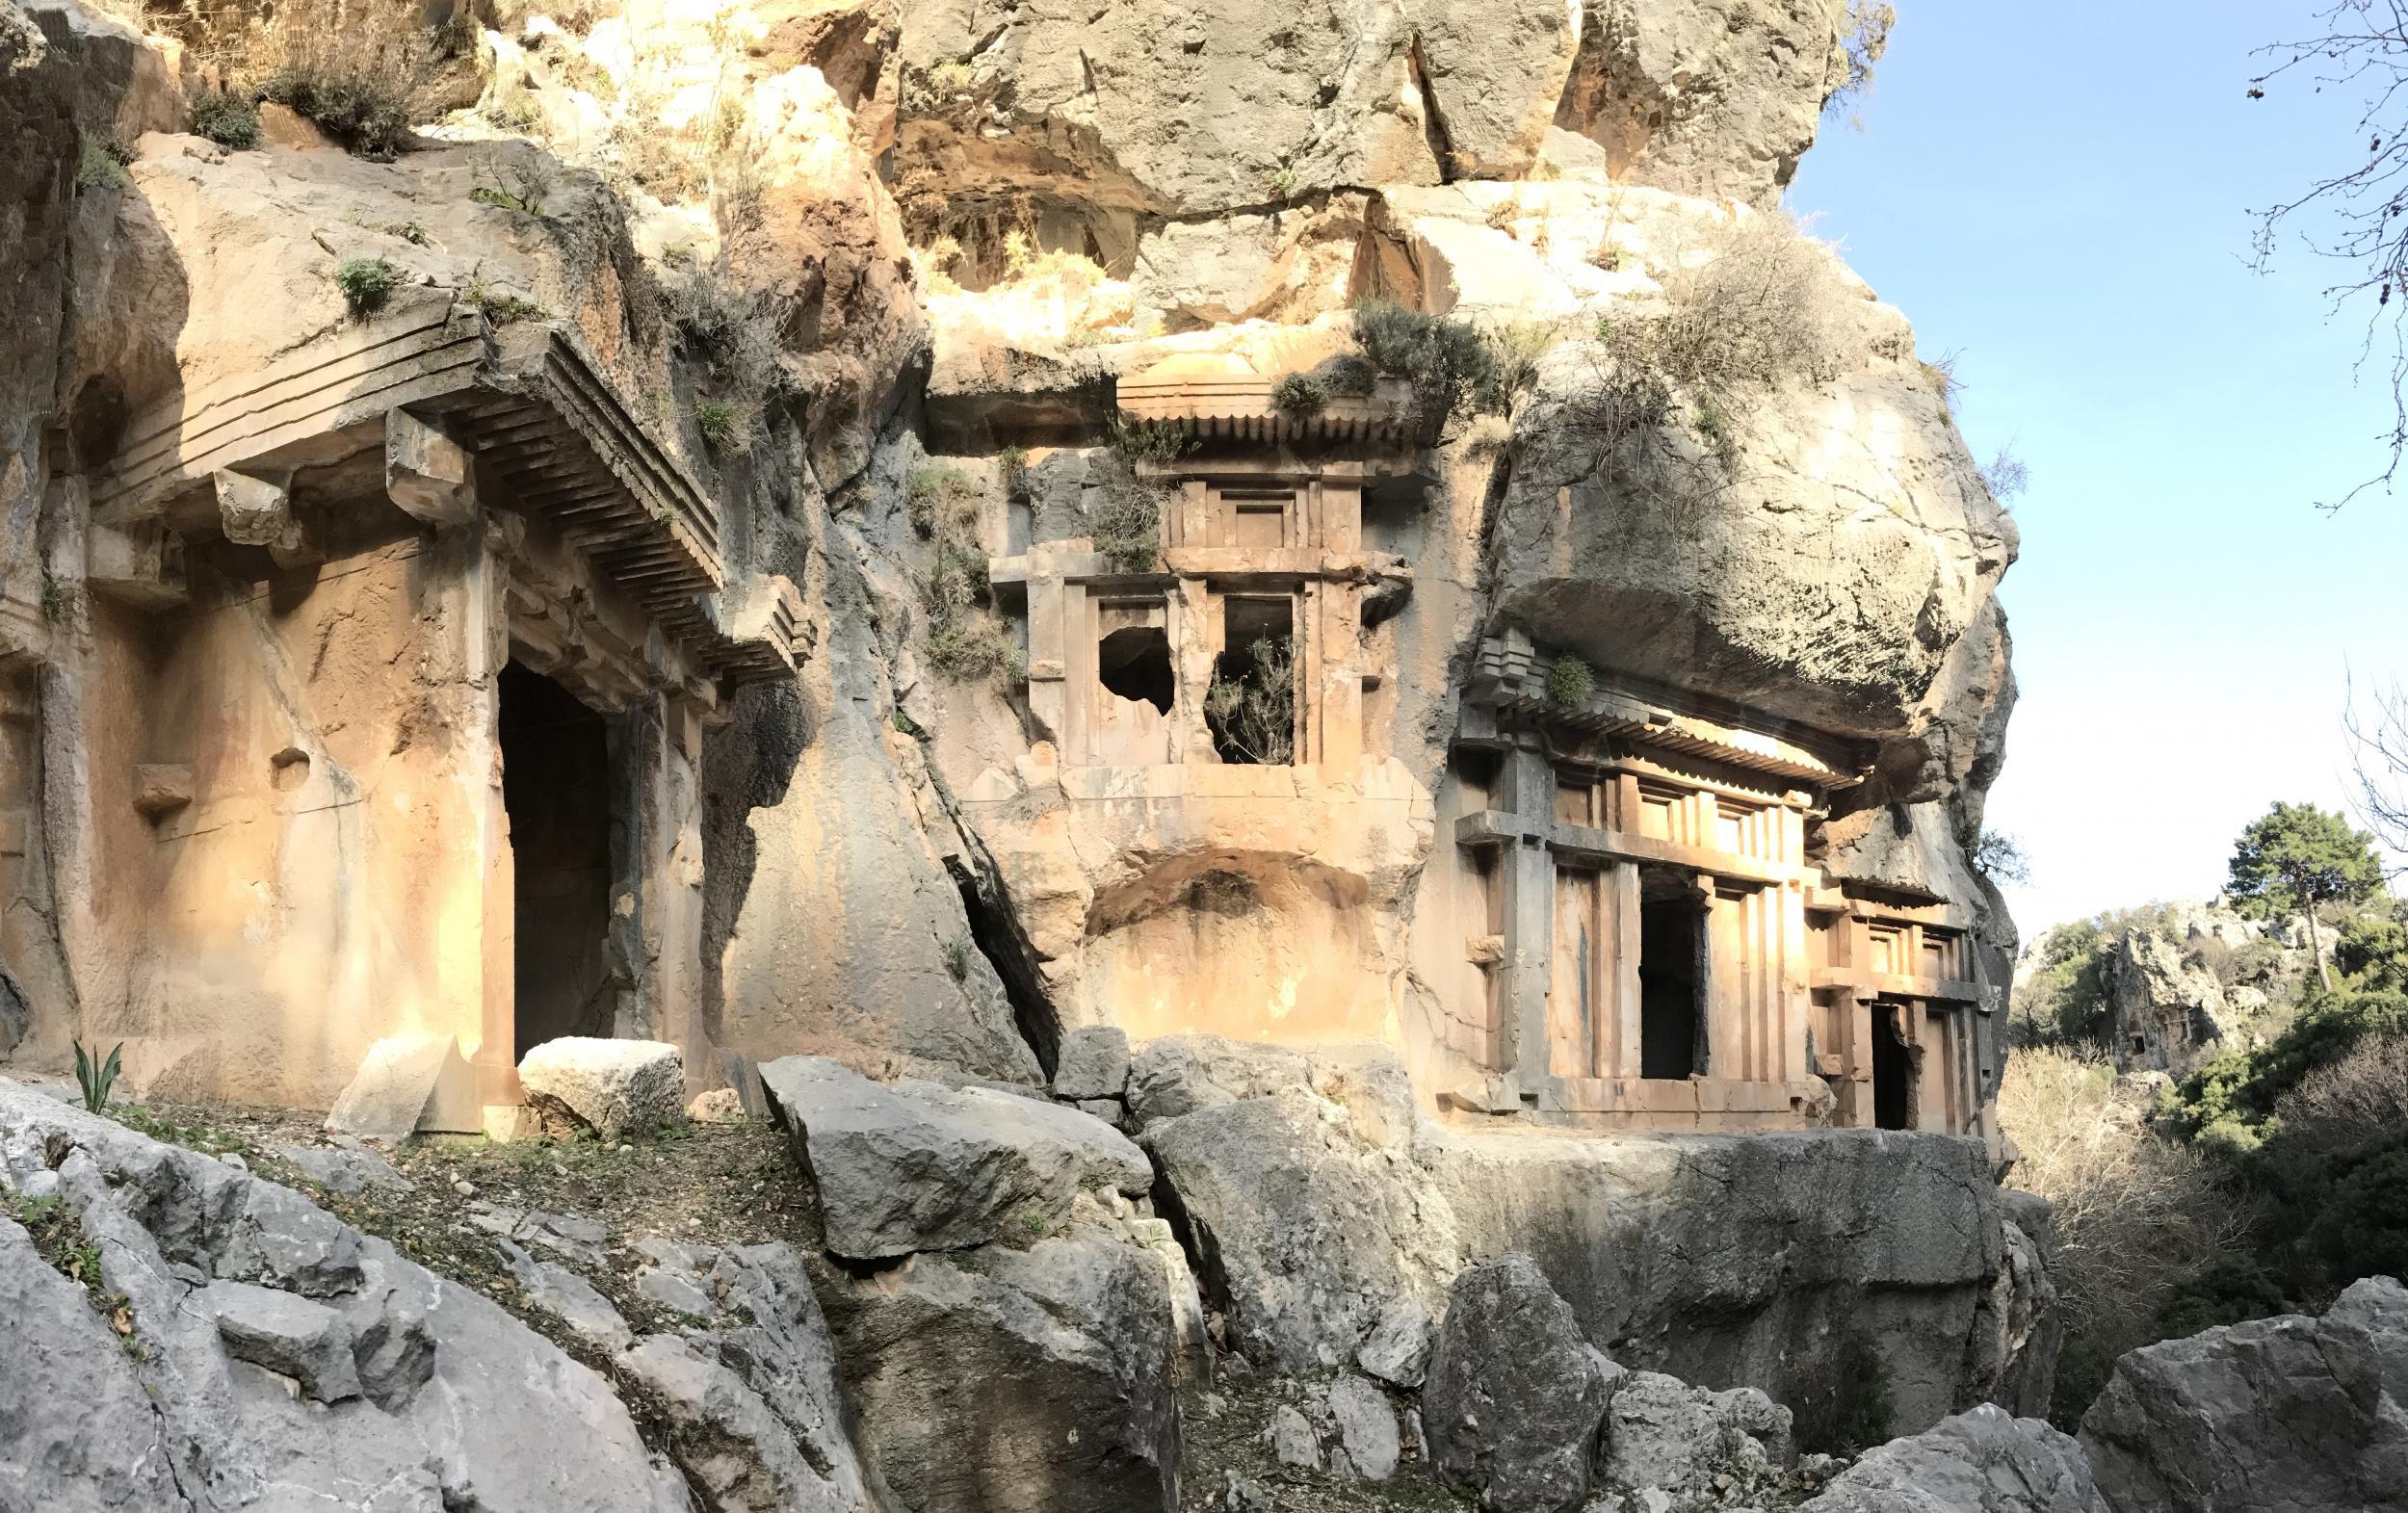 The rock tombs of Pinara are 25 miles along the Lycian Way